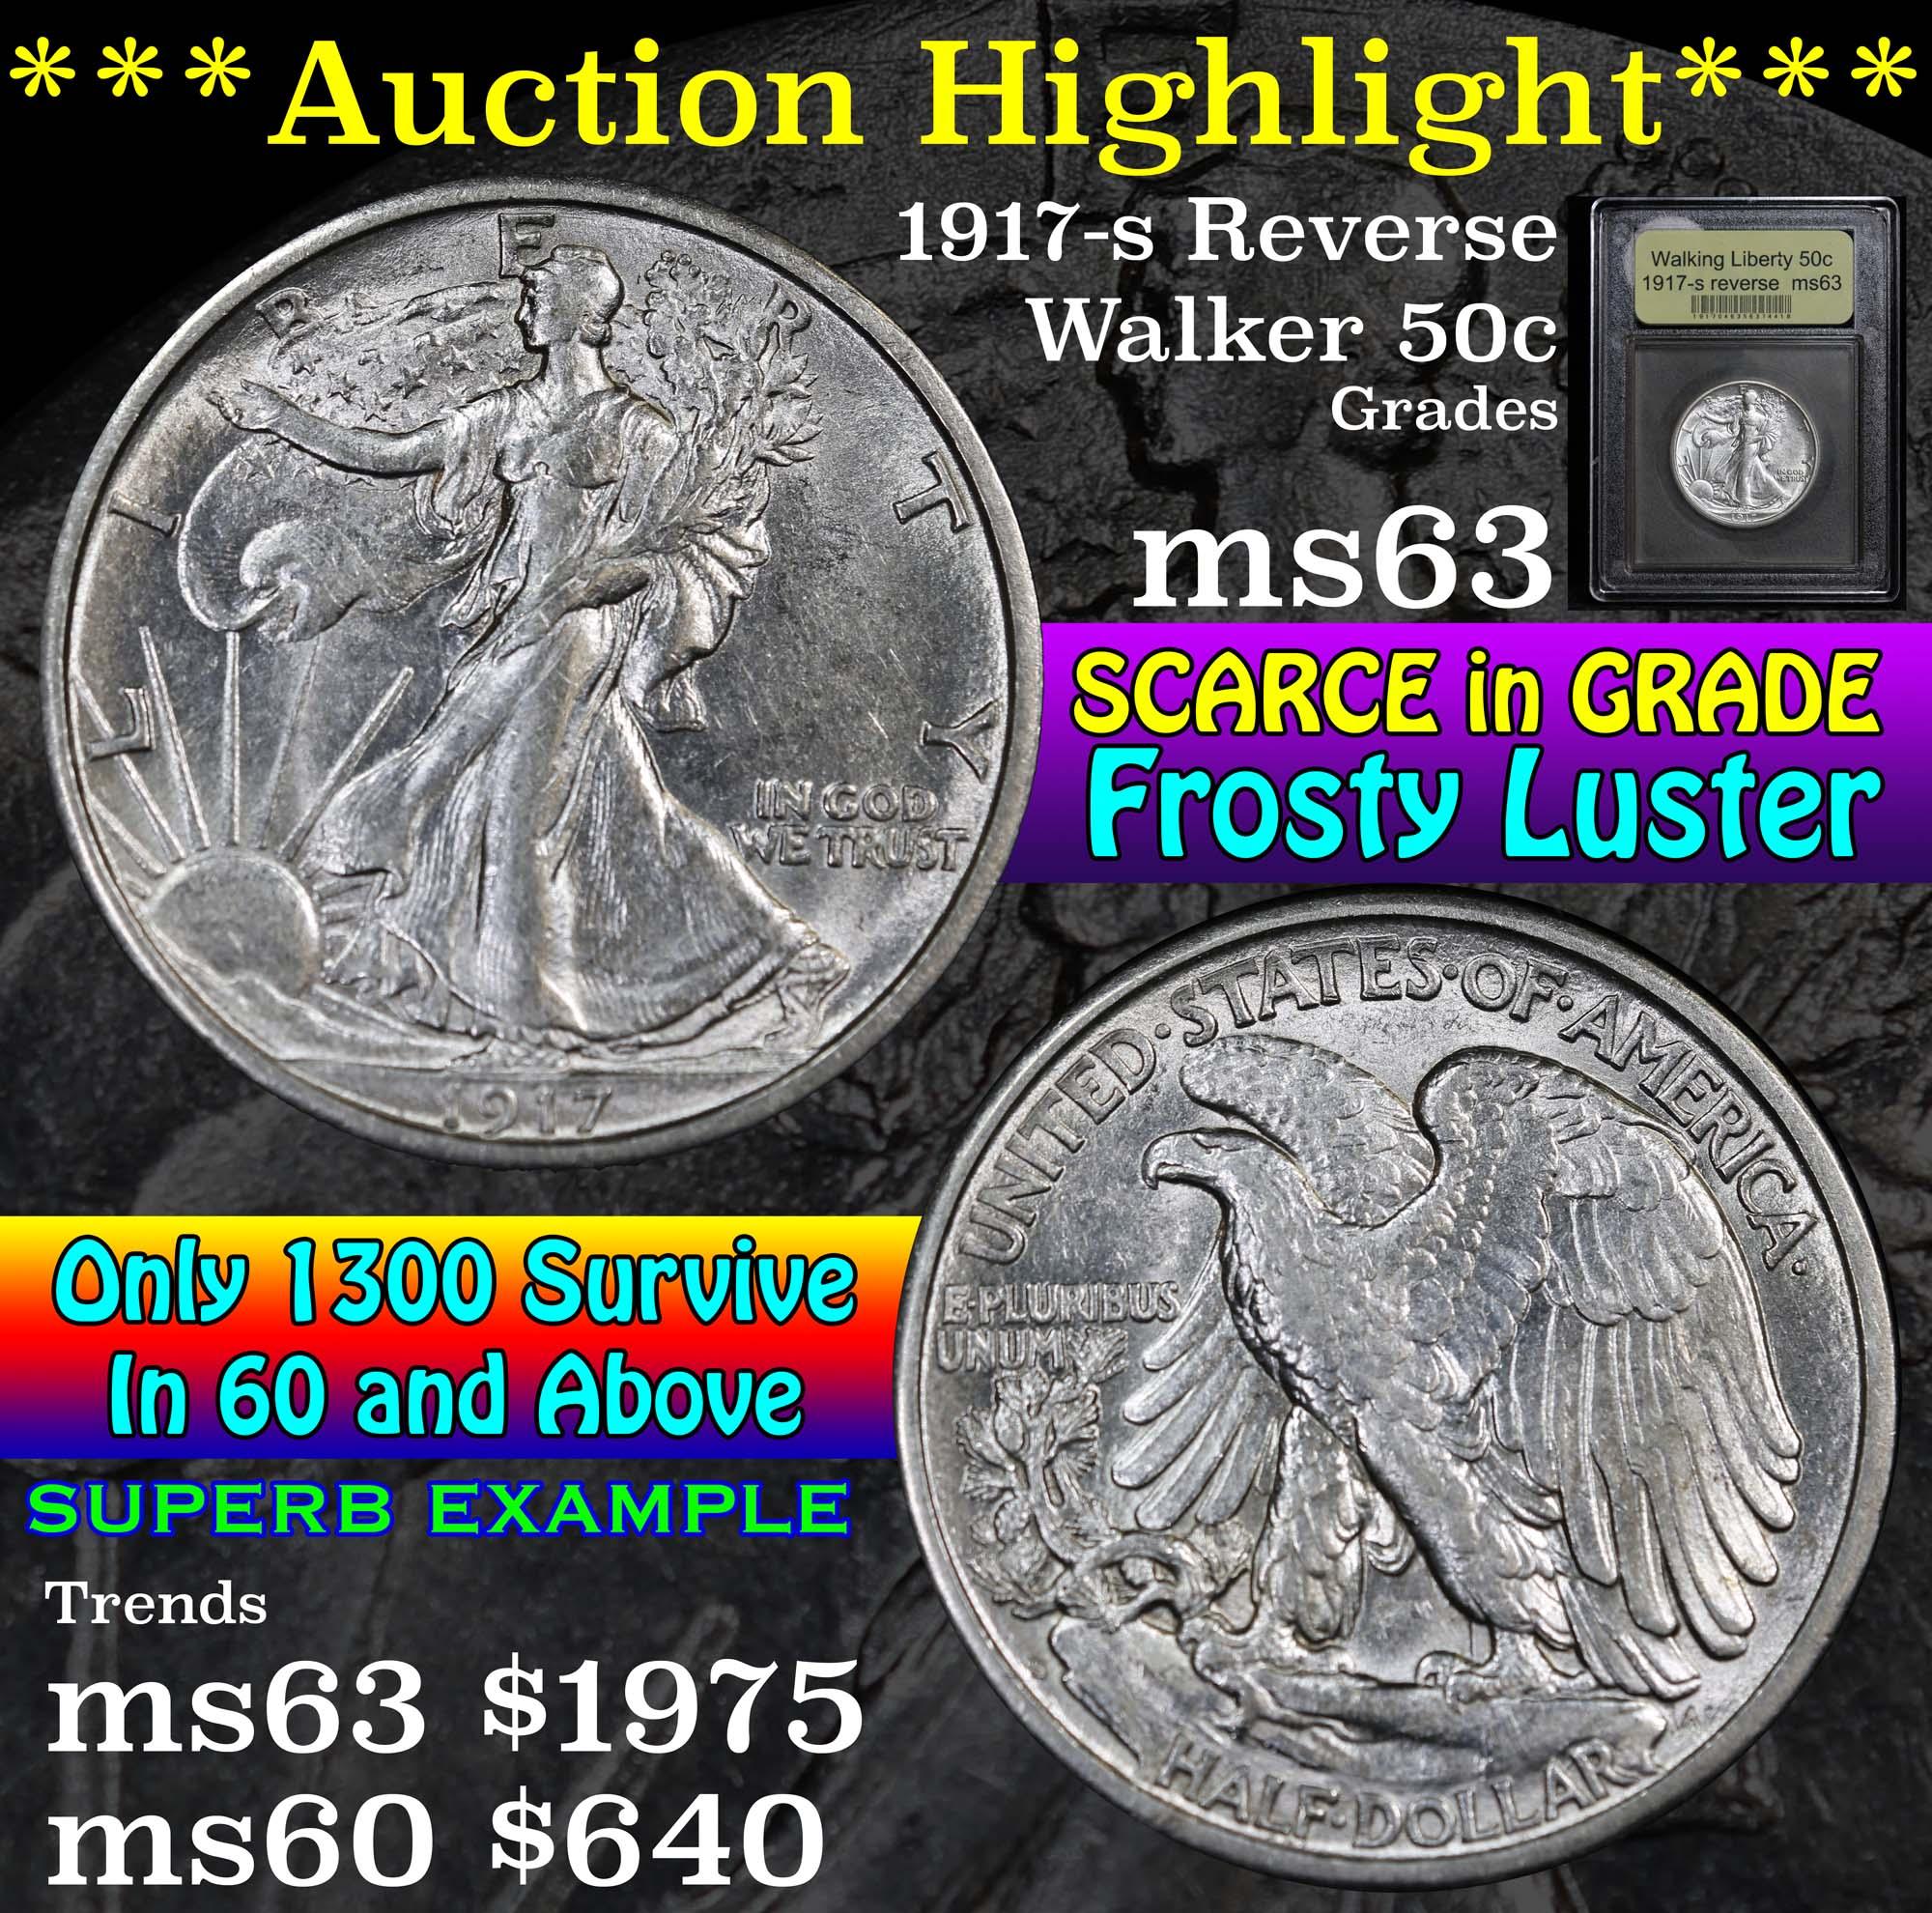 **Auction Highlight** 1917-s reverse Walking Liberty Half Dollar 50c Graded Select Unc by USCG (fc)